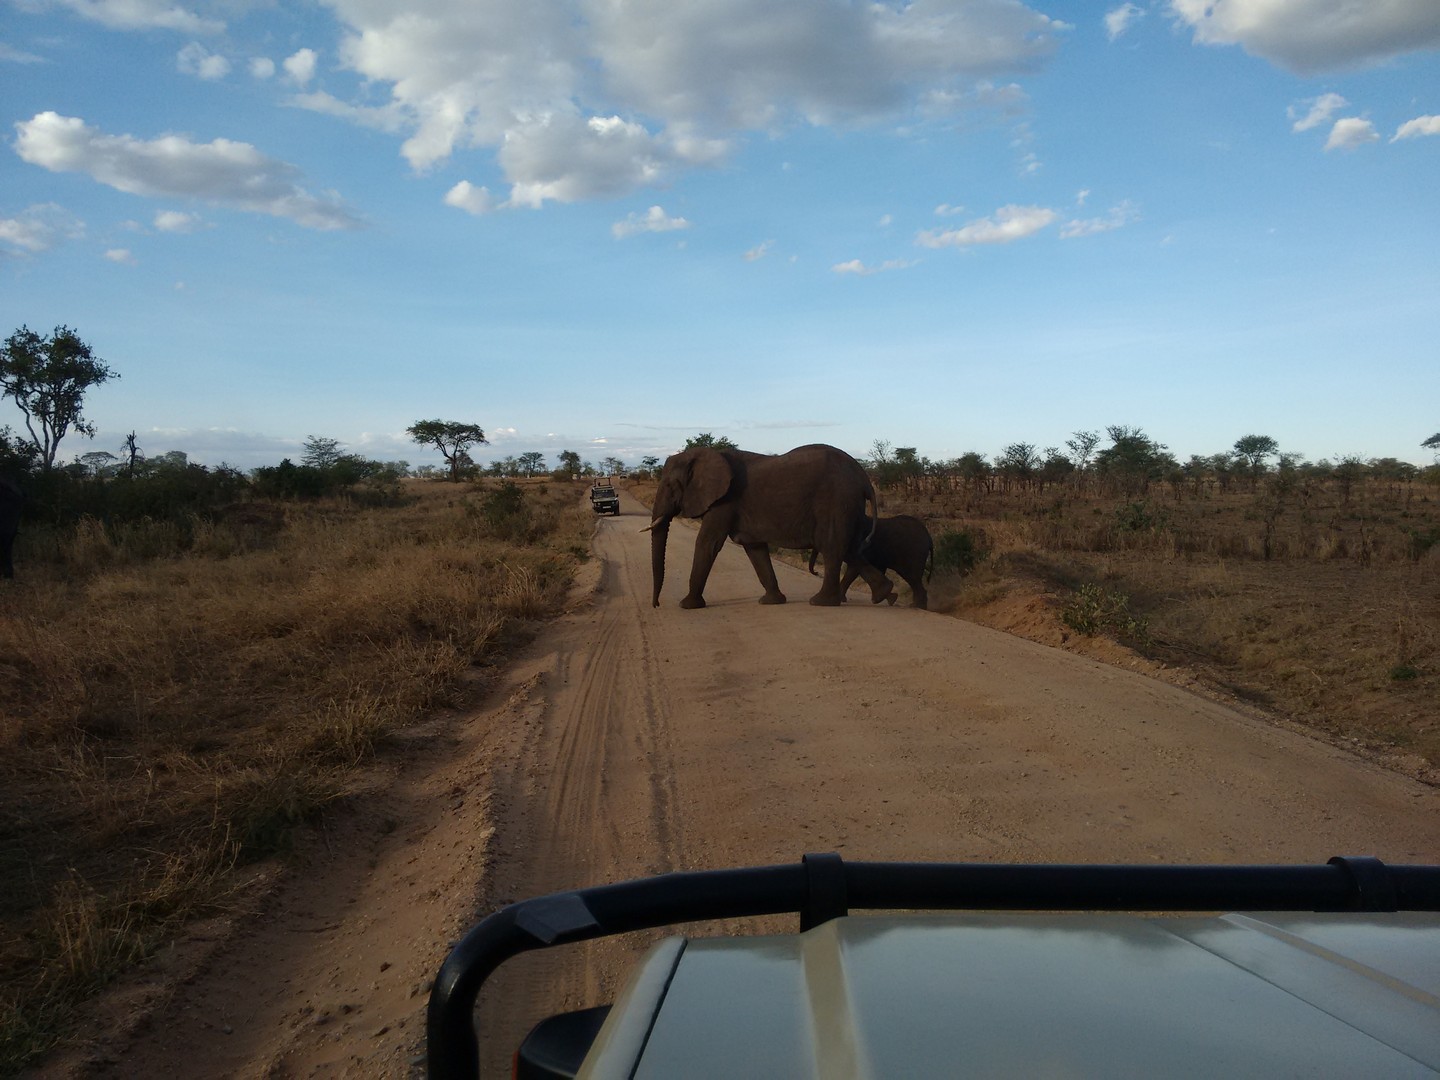 Elephants have right of way